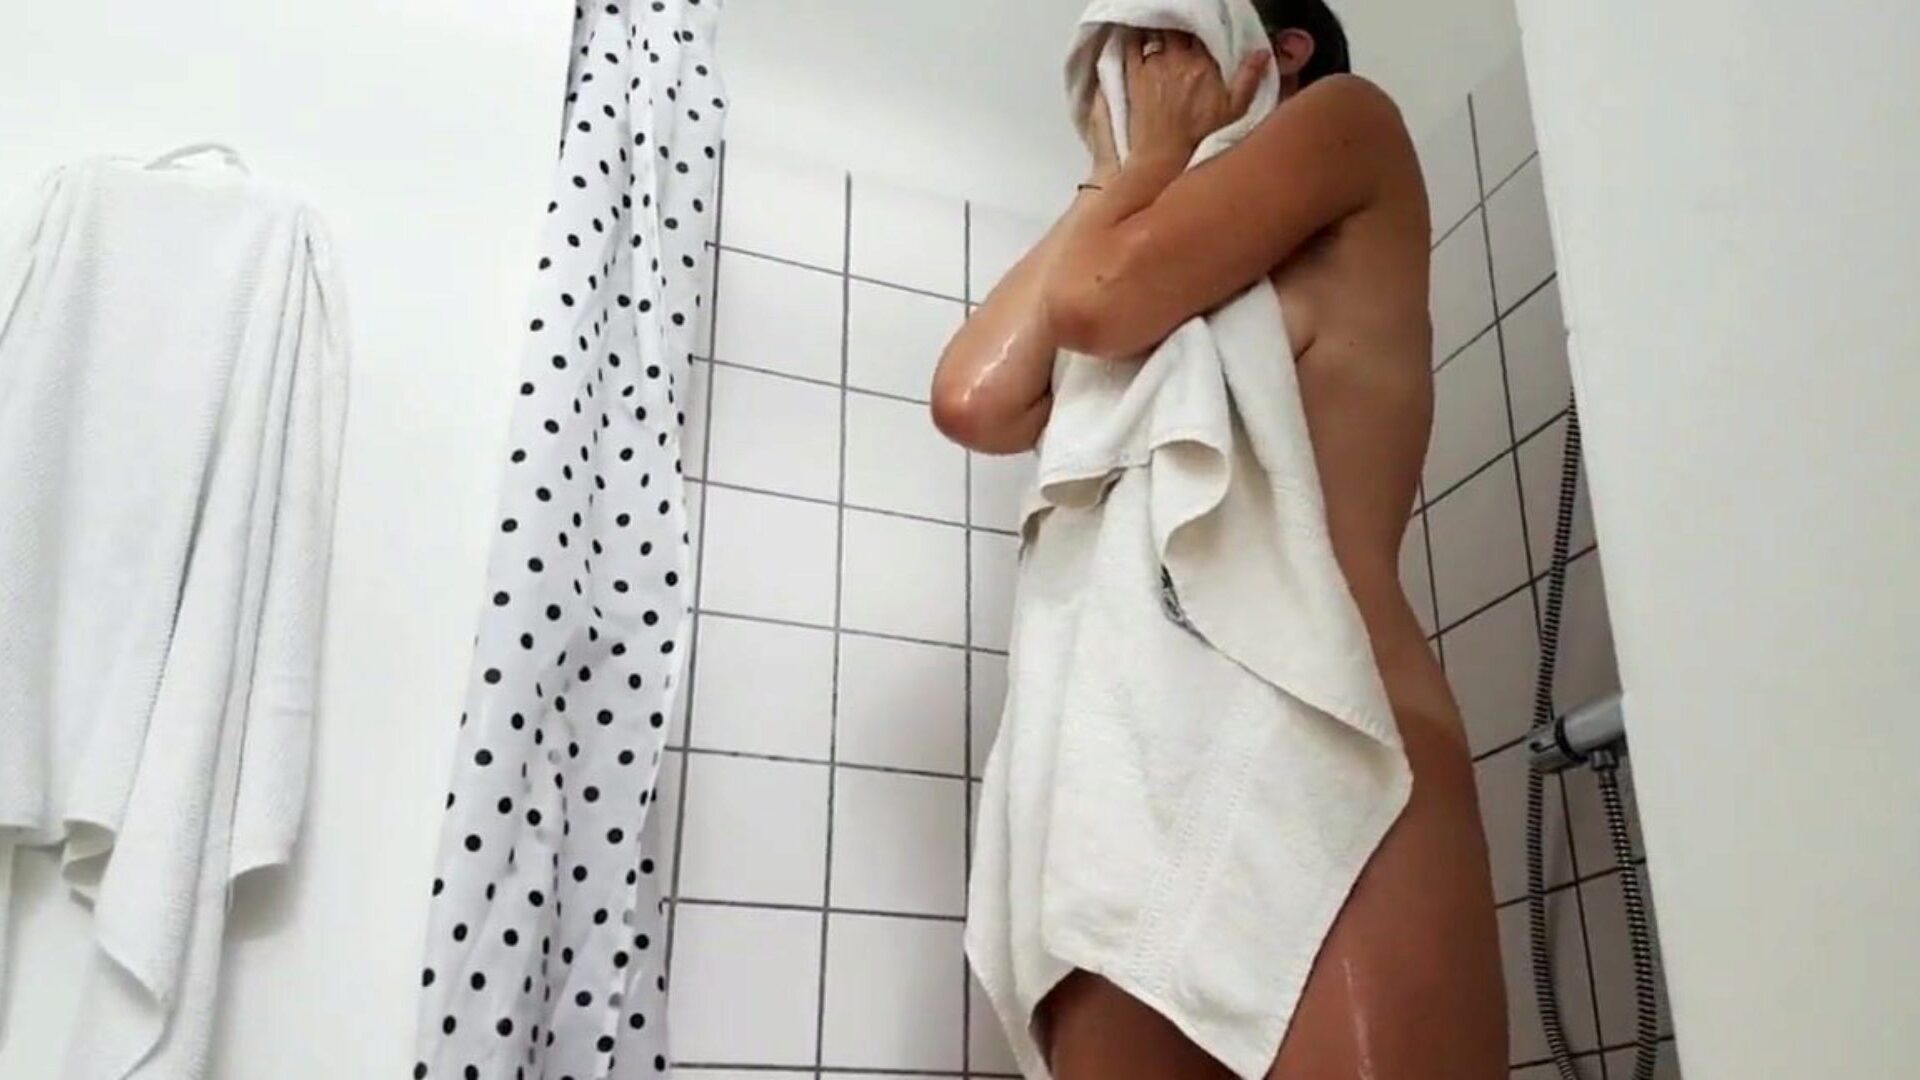 My Sexy Wife in Shower and Bathroom, Free Porn b9: xHamster Watch My Sexy Wife in Shower and Bathroom episode on xHamster, the finest HD fucky-fucky tube web resource with tons of free-for-all Xxnx Sexy Xxx Shower & Shower Xxx pornography episodes